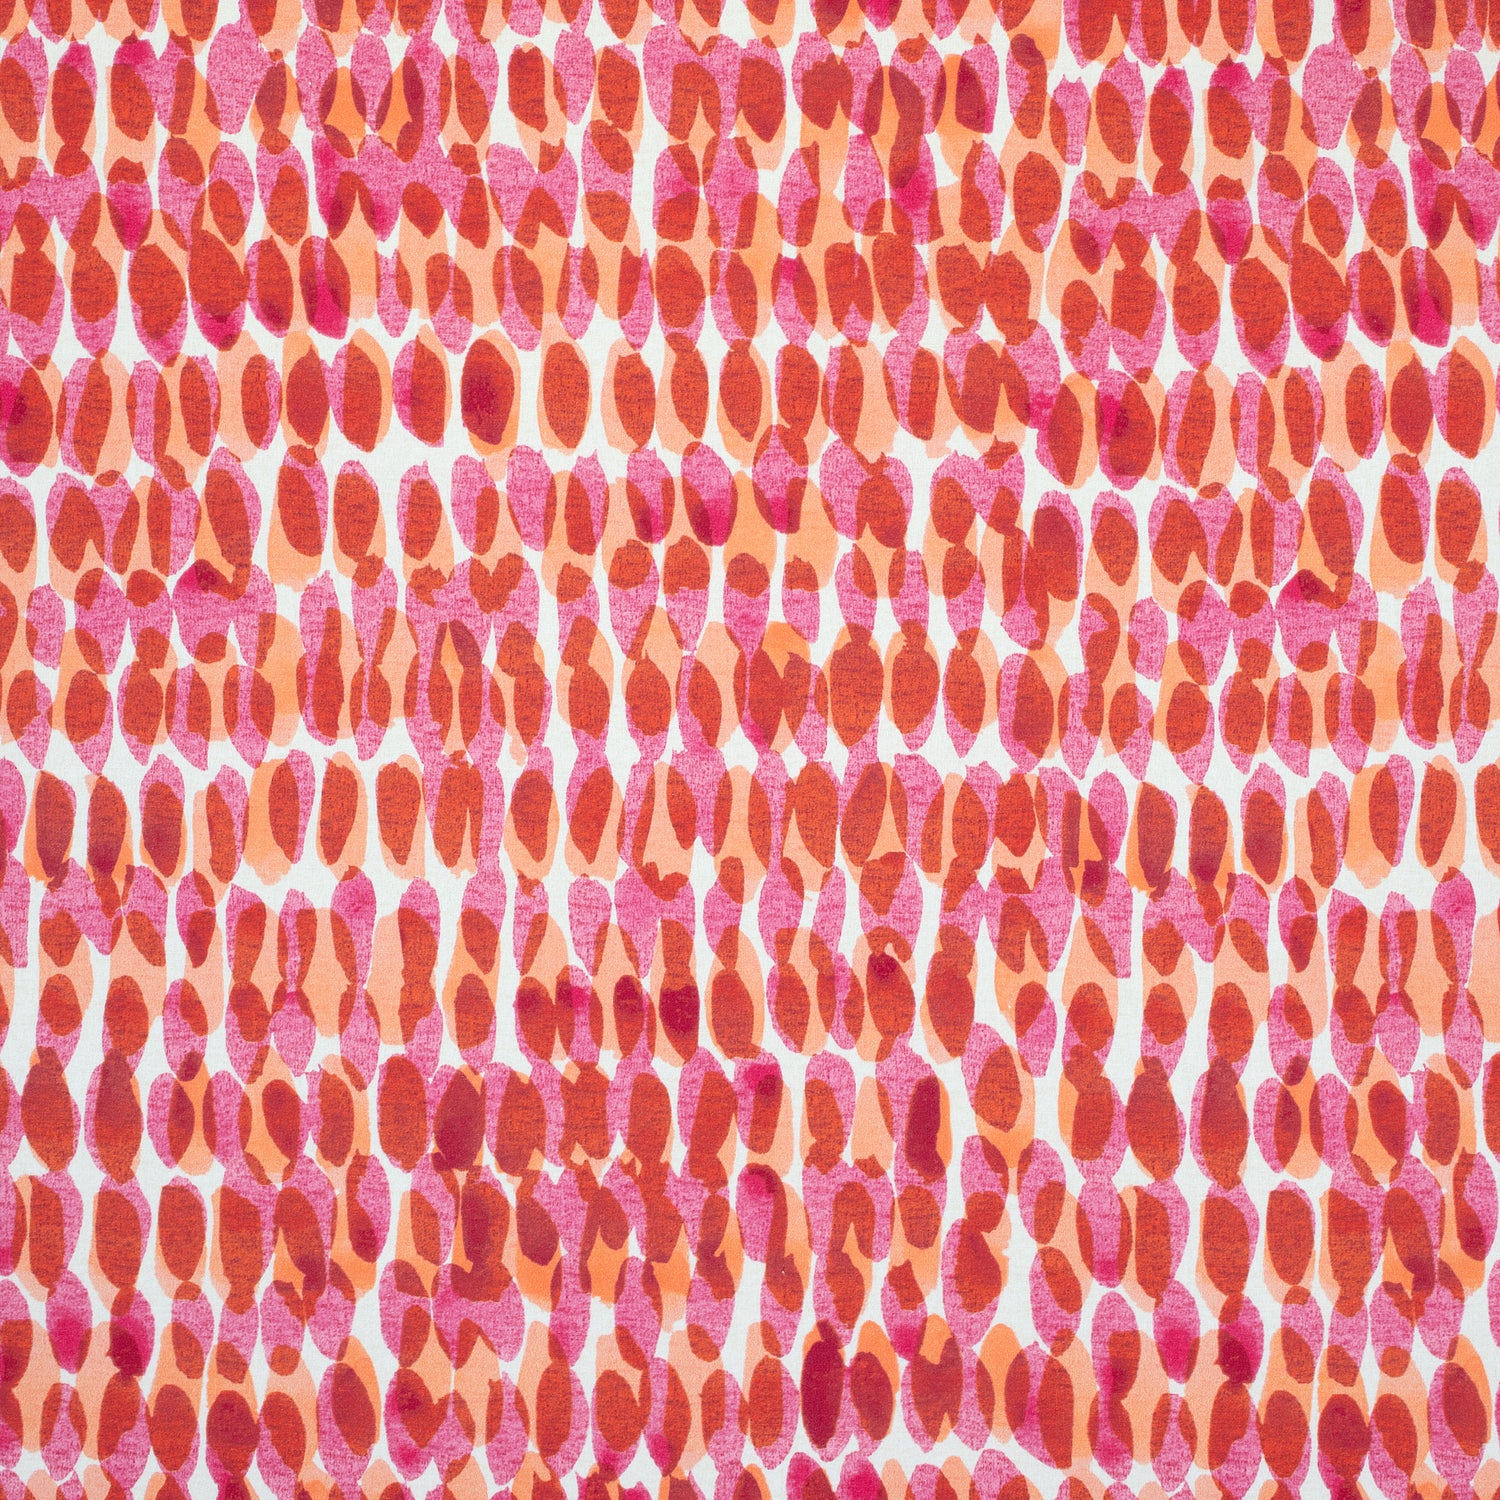 Rain Water fabric in pink and coral color - pattern number F910095 - by Thibaut in the Tropics collection